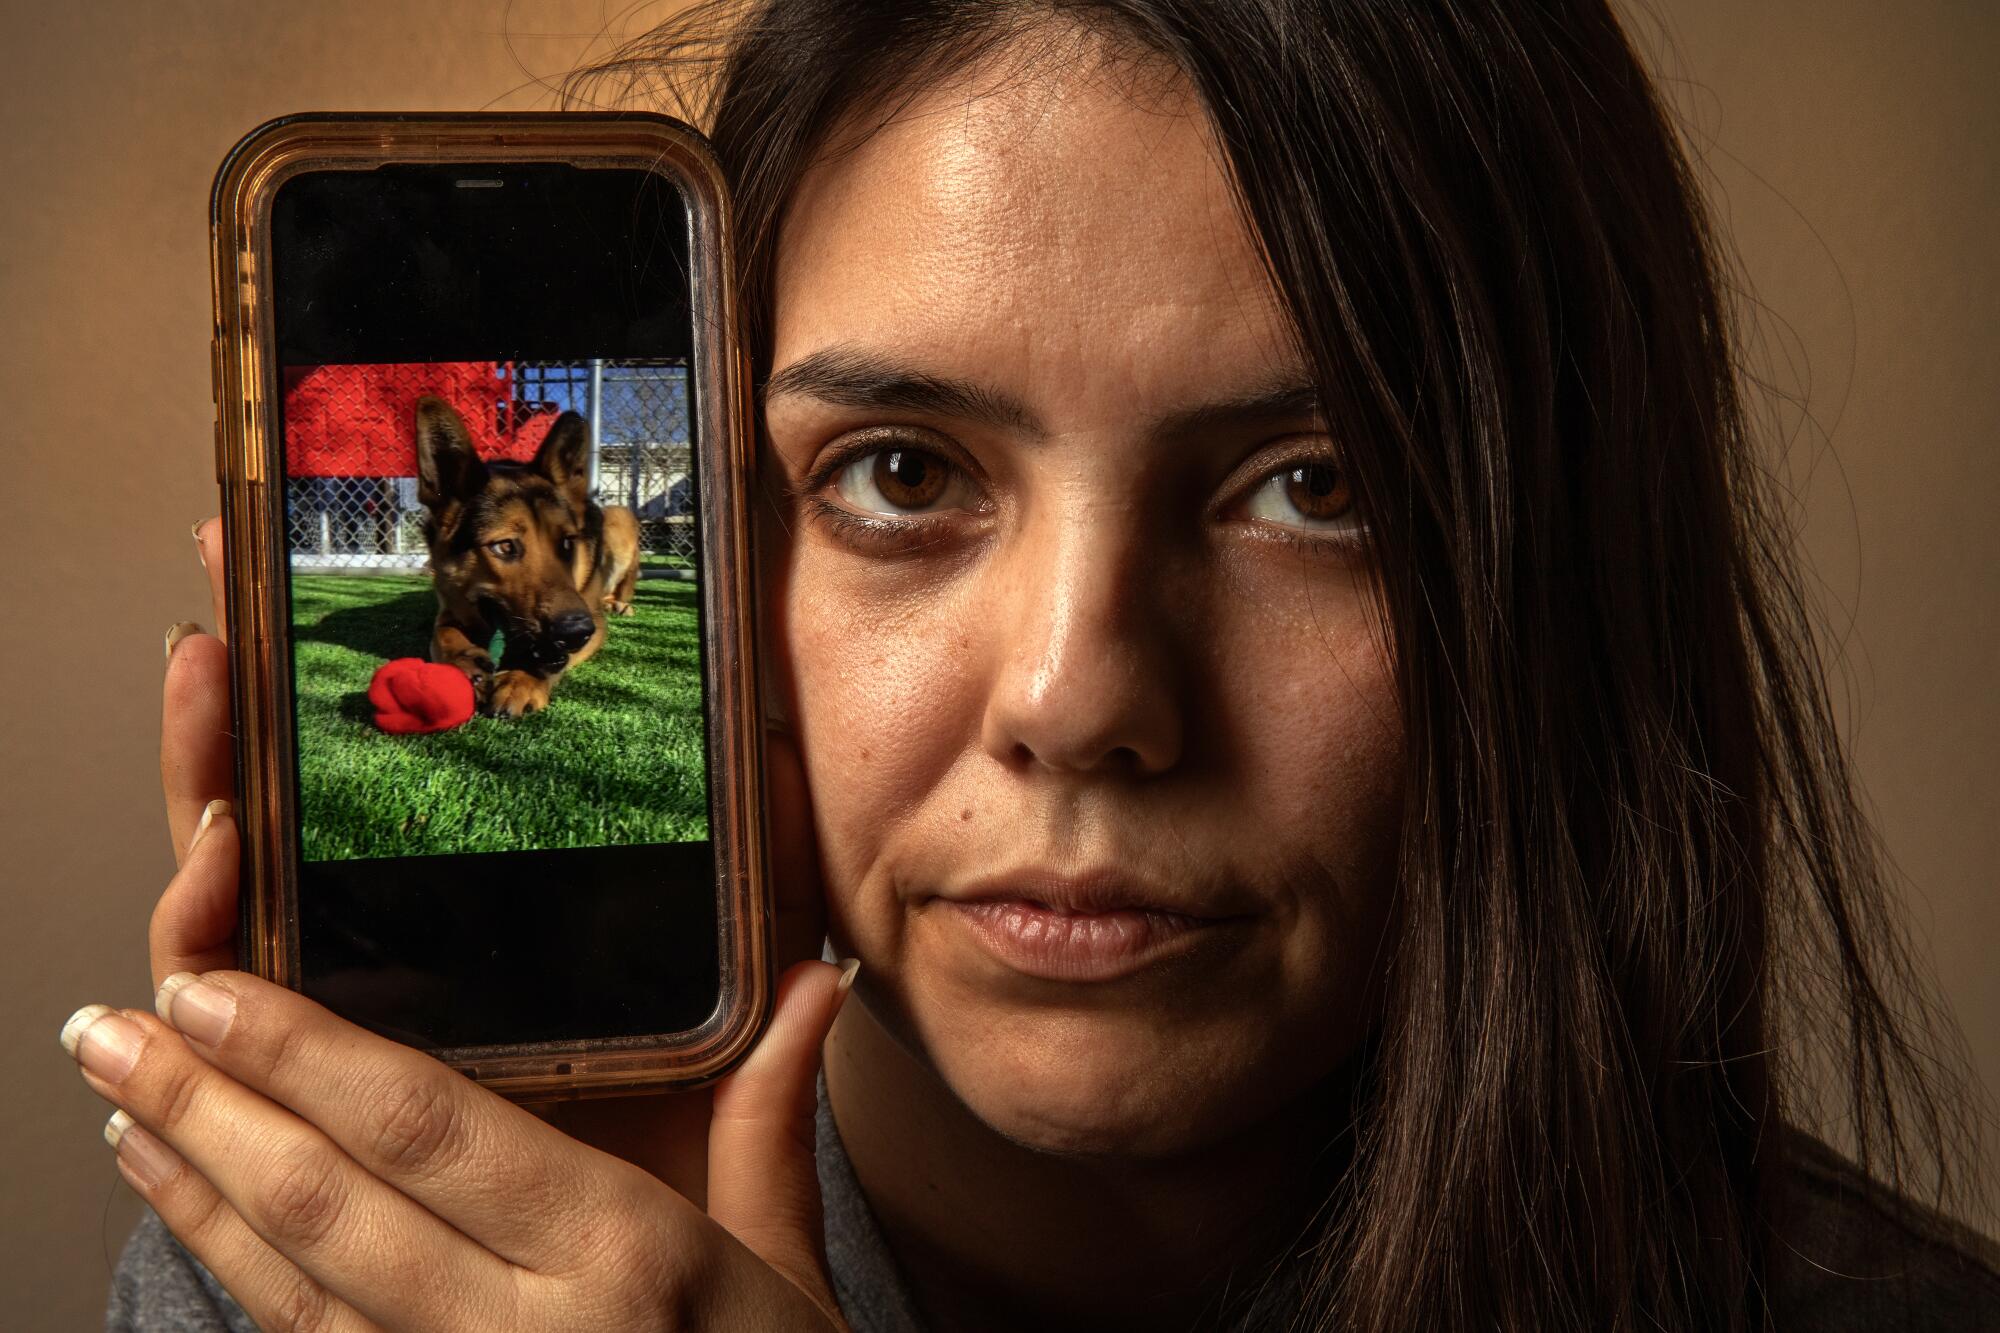 A closeup of a woman holding a cellphone next to her face, showing a picture of a German shepherd playing on a lawn